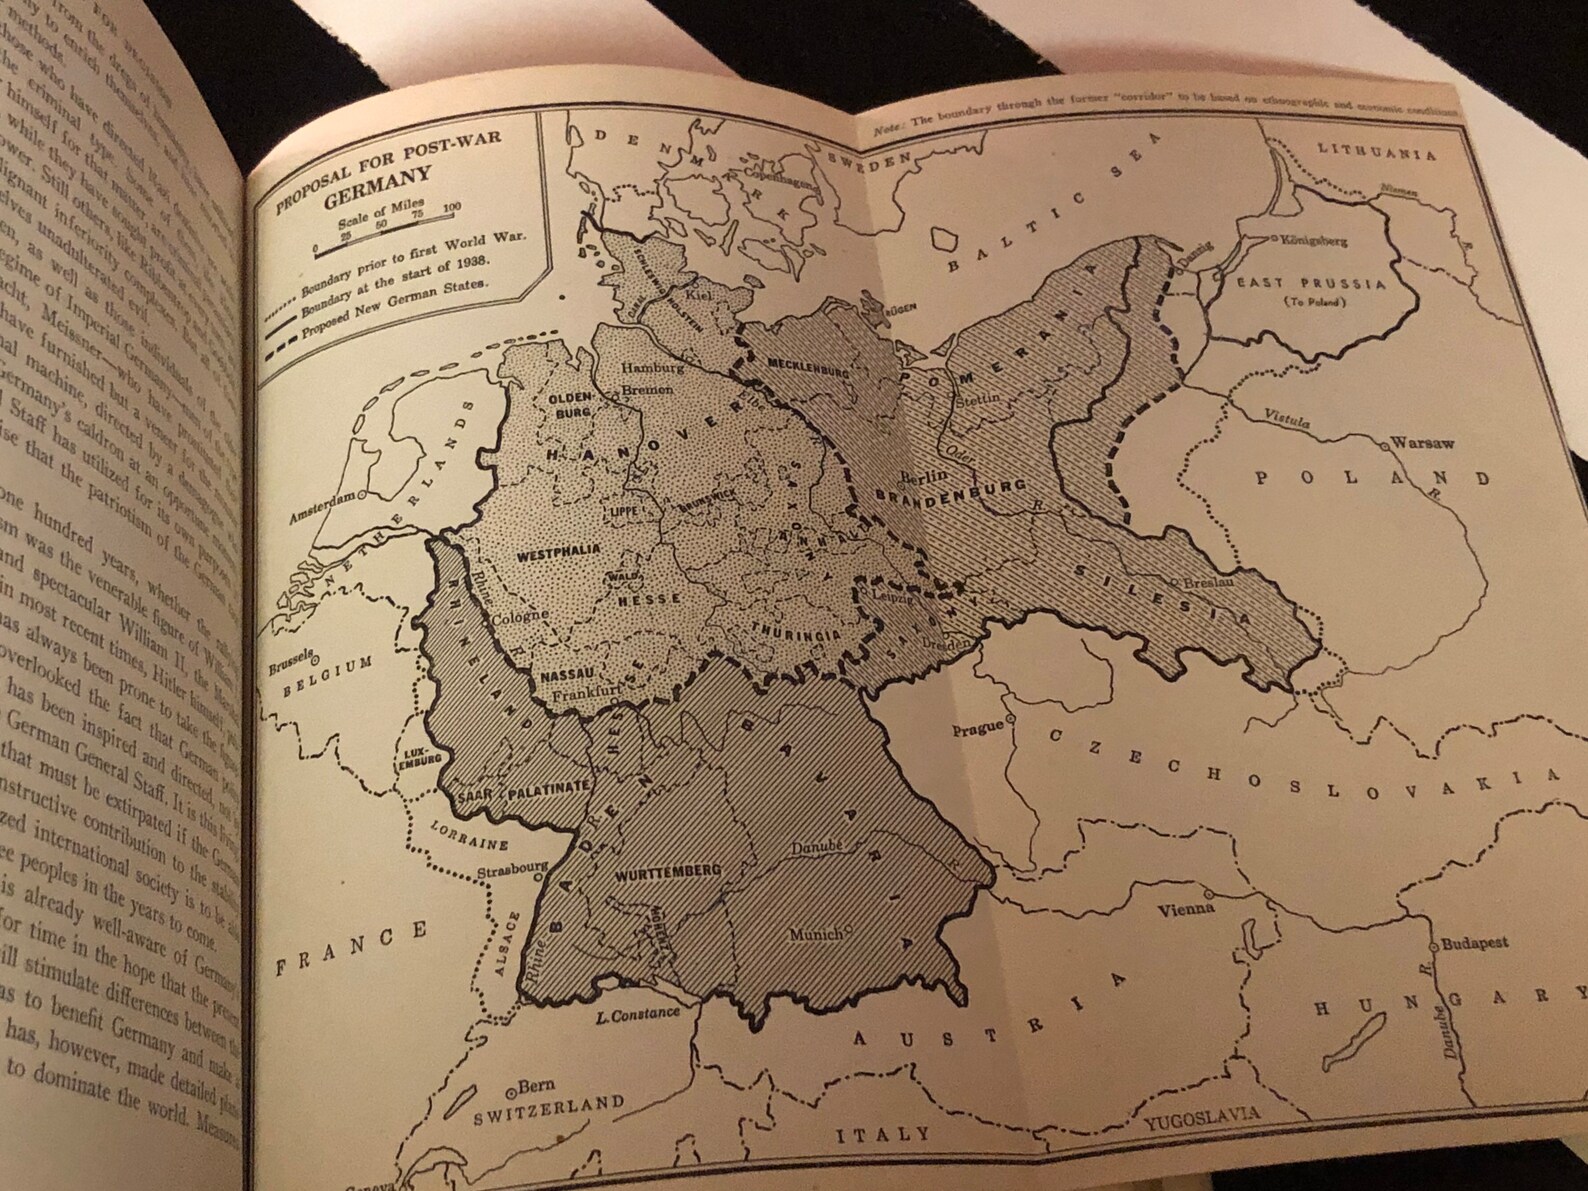 an open book showing a map of germany.